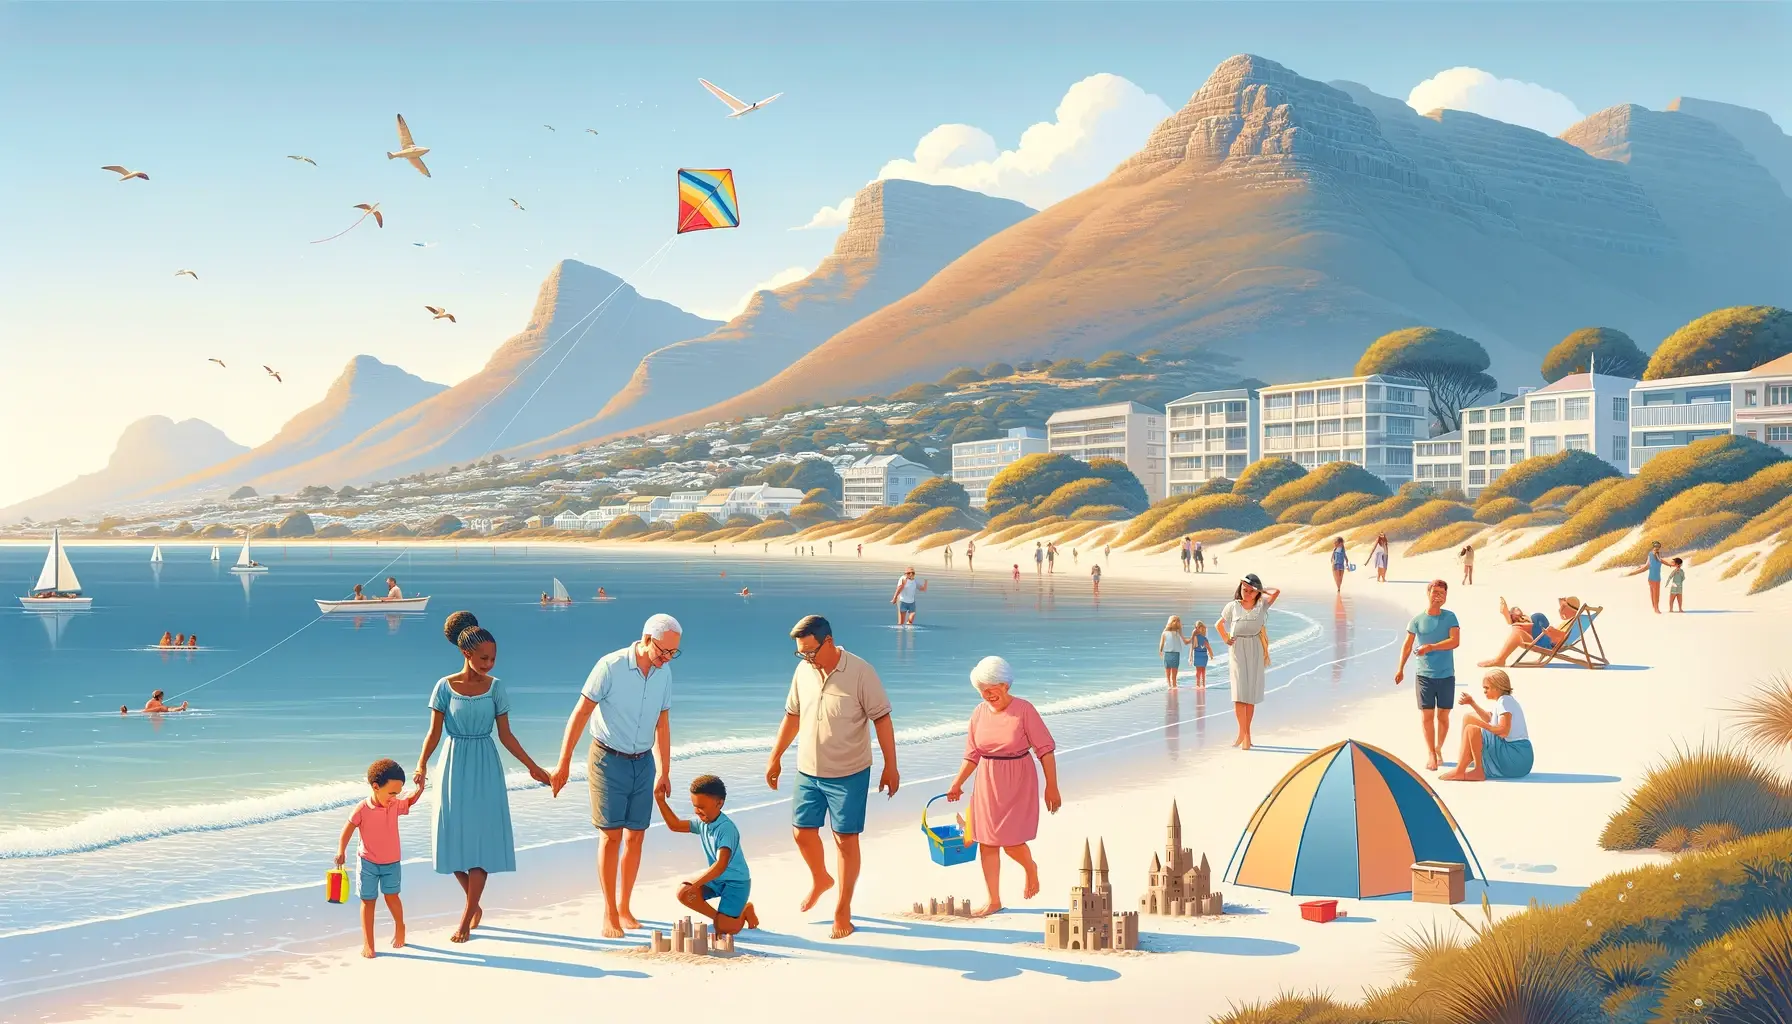 A peaceful and family-friendly image of Fish Hoek Beach in Cape Town